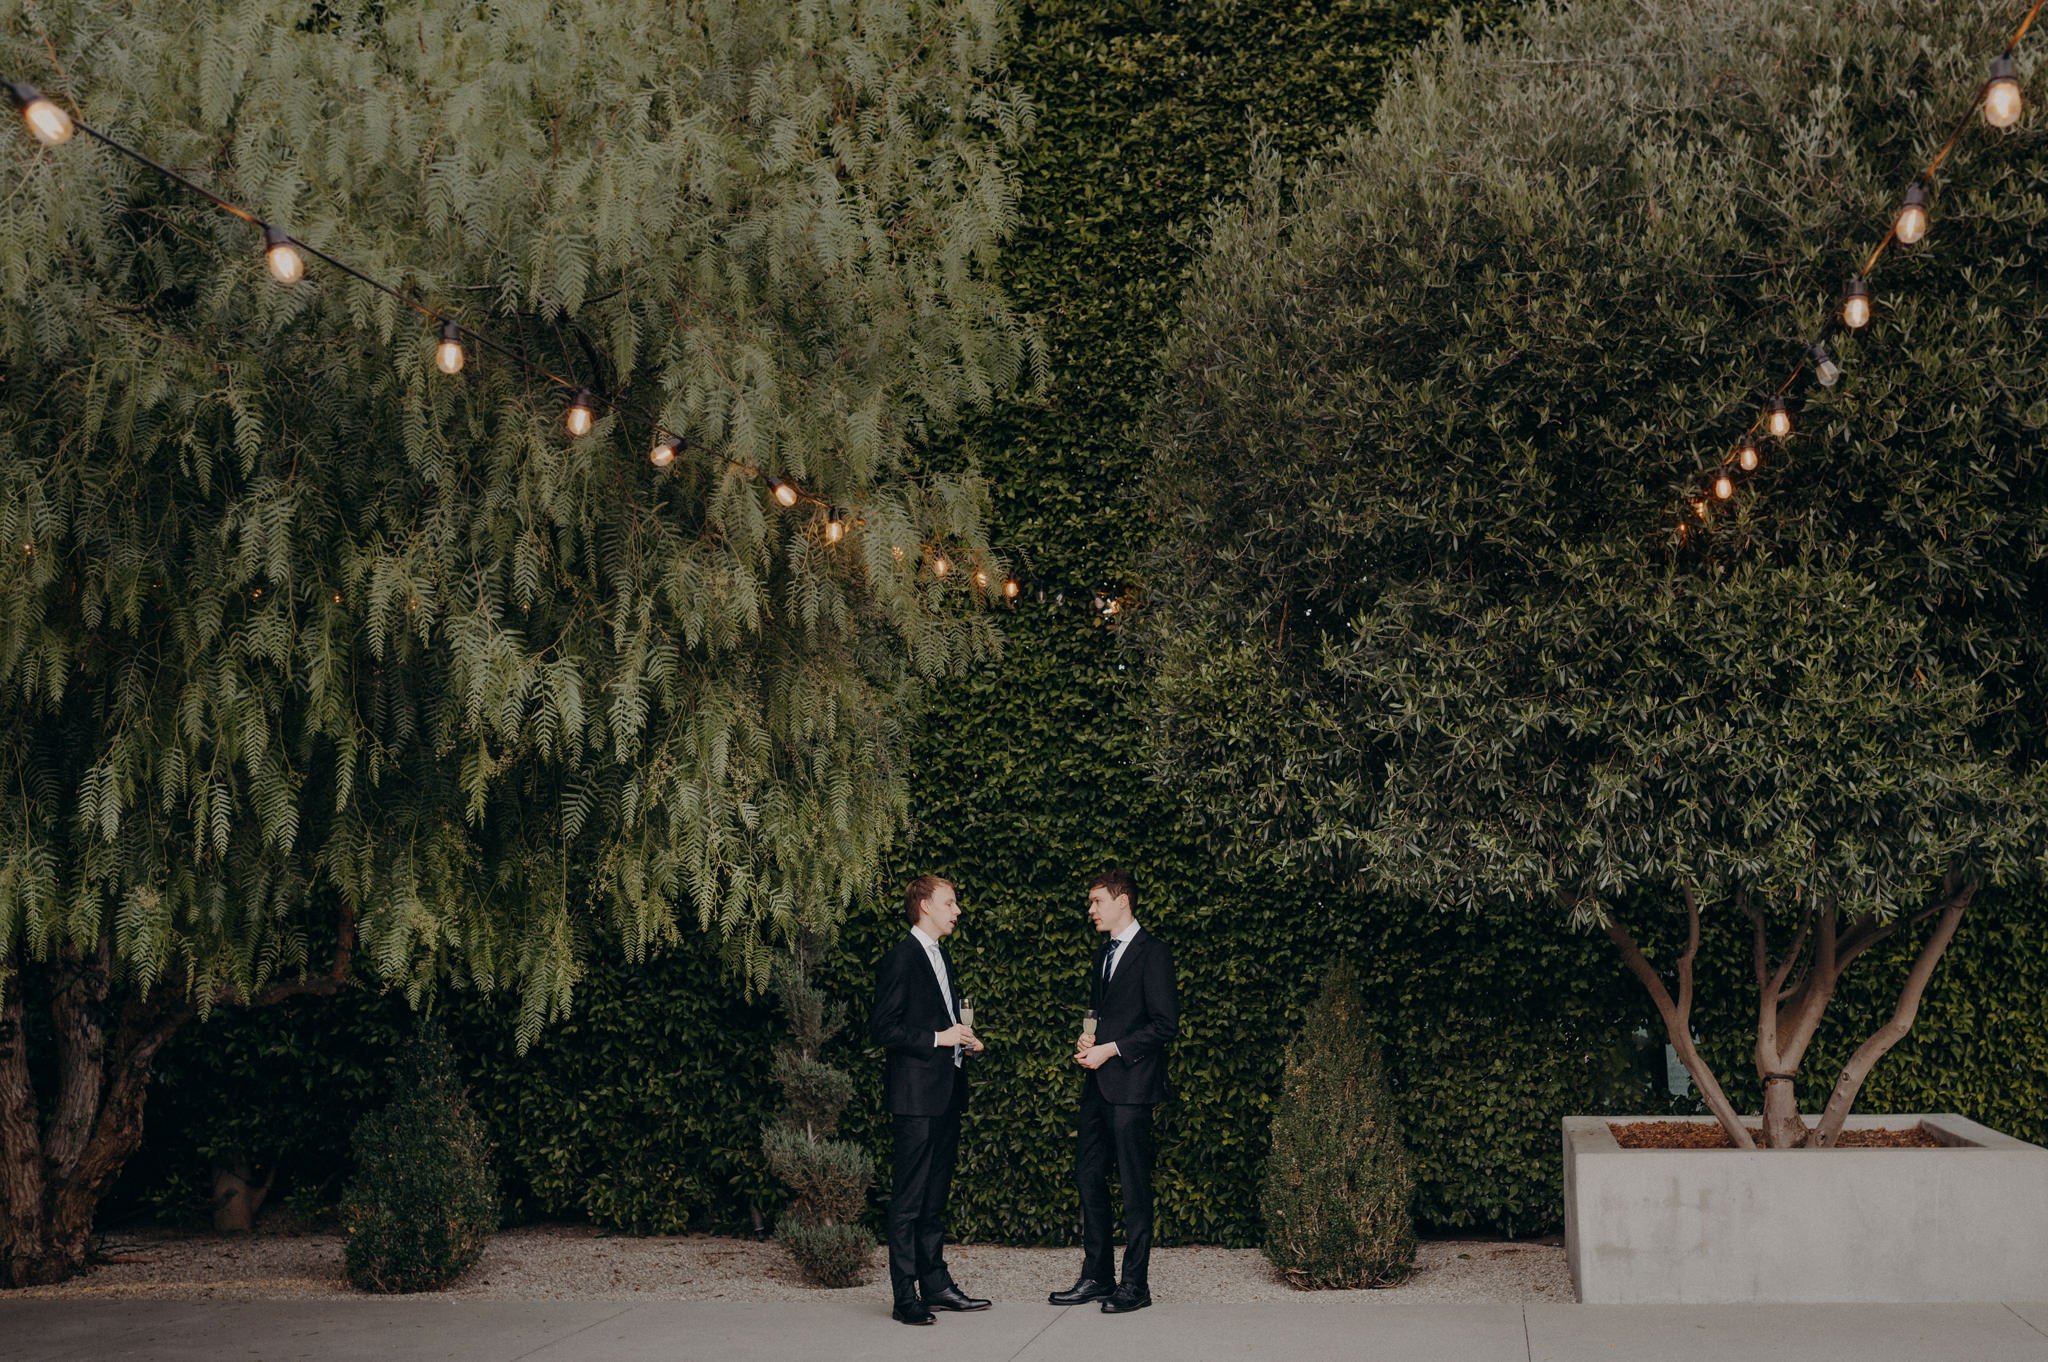 the fig house wedding - queer wedding photographers in los angeles - itlaphoto.com-86.jpg